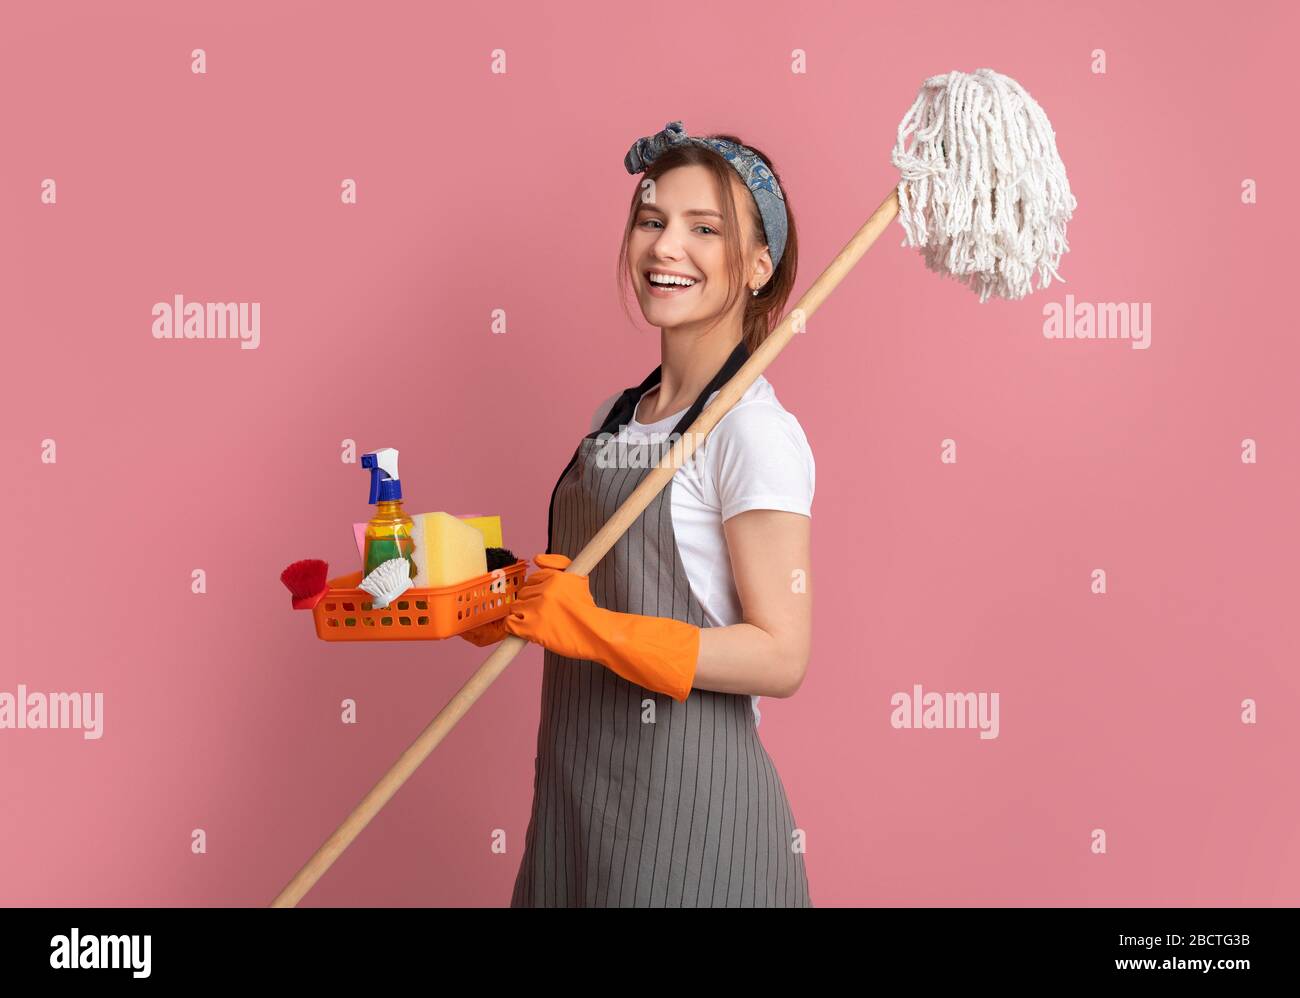 Professional Cleaning. Smiling Young Woman With Household Supplies In Hands Stock Photo